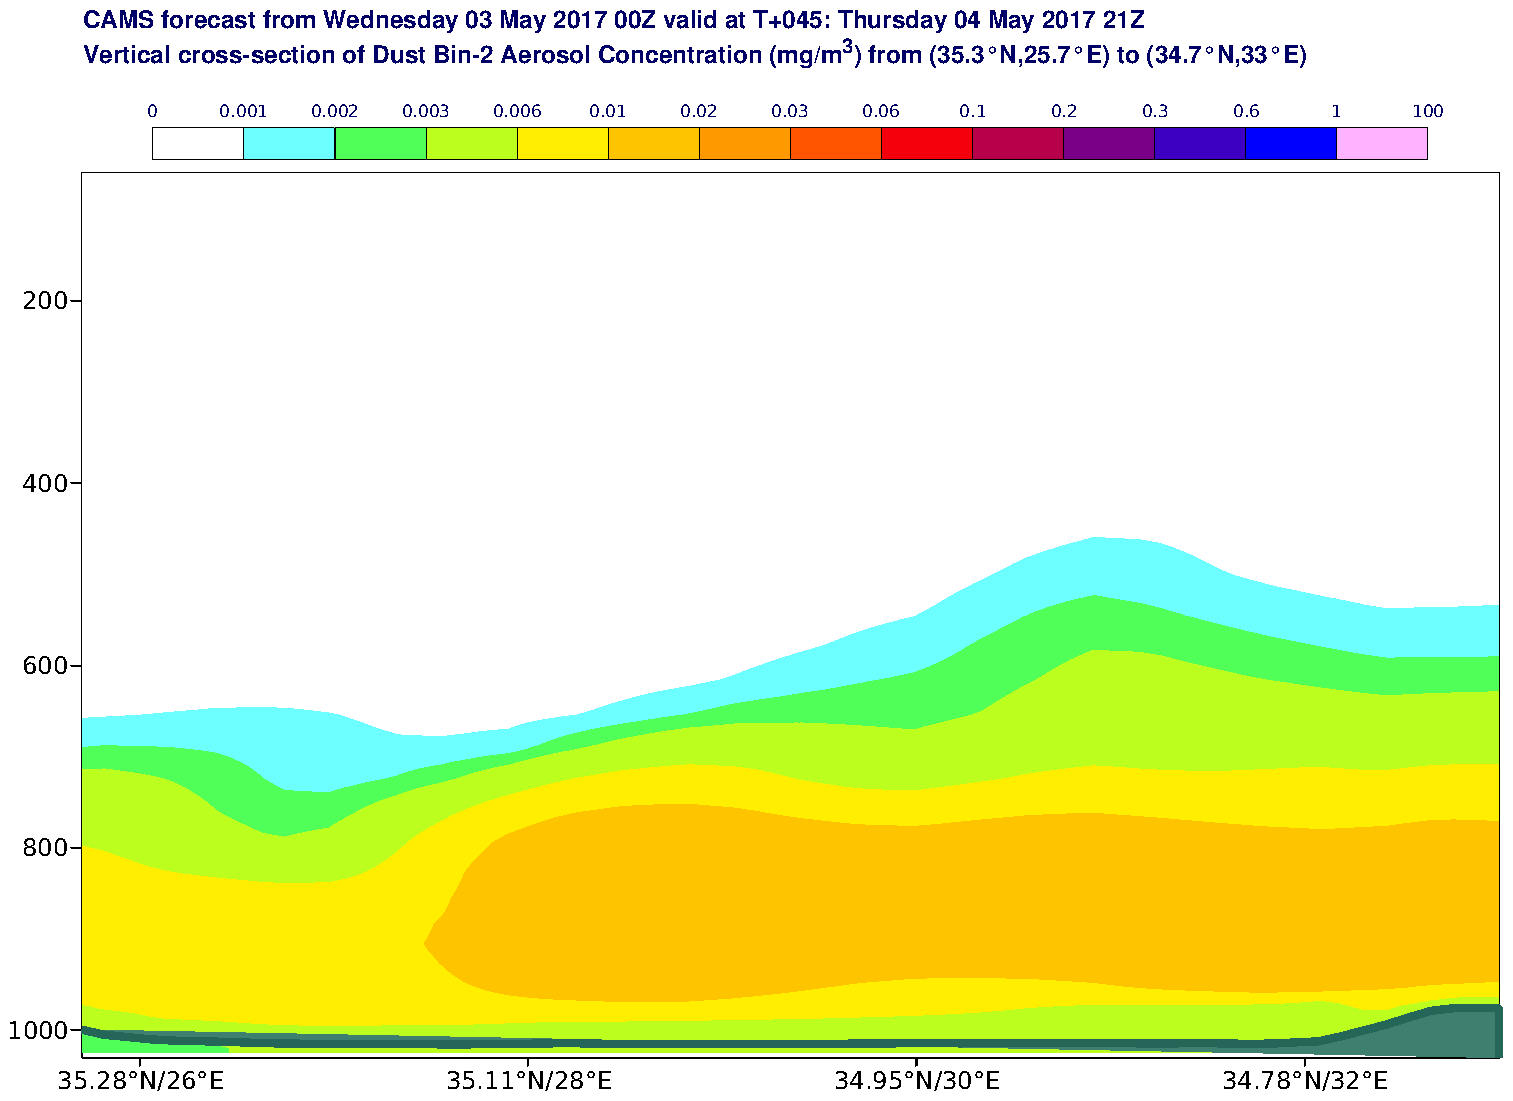 Vertical cross-section of Dust Bin-2 Aerosol Concentration (mg/m3) valid at T45 - 2017-05-04 21:00